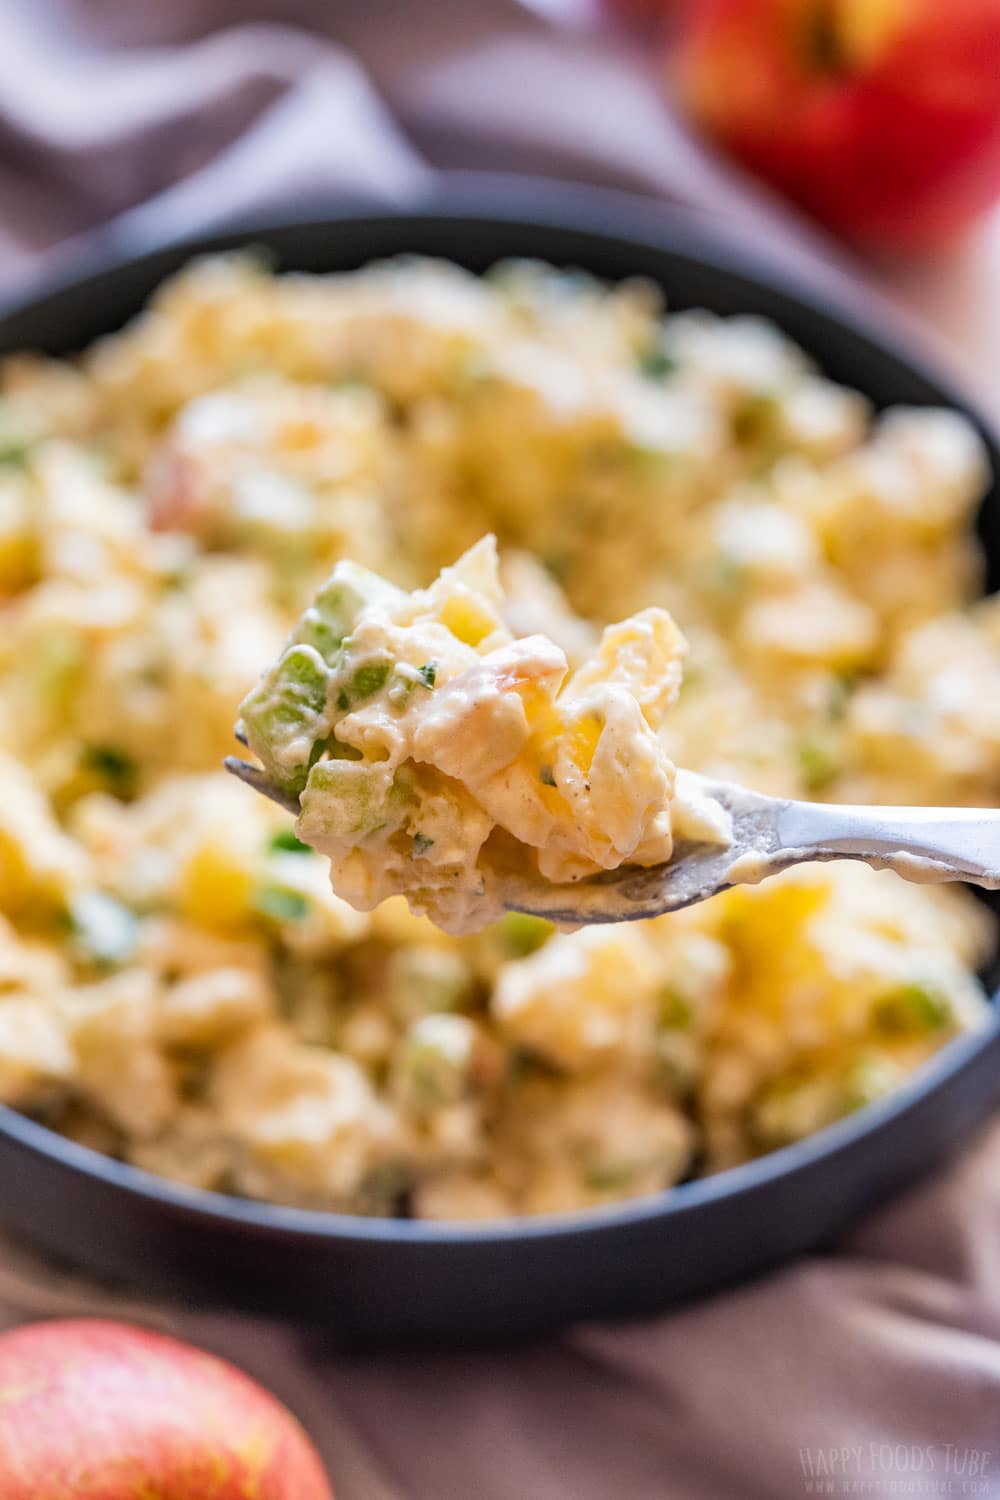 Forking potato salad with apples and celery.